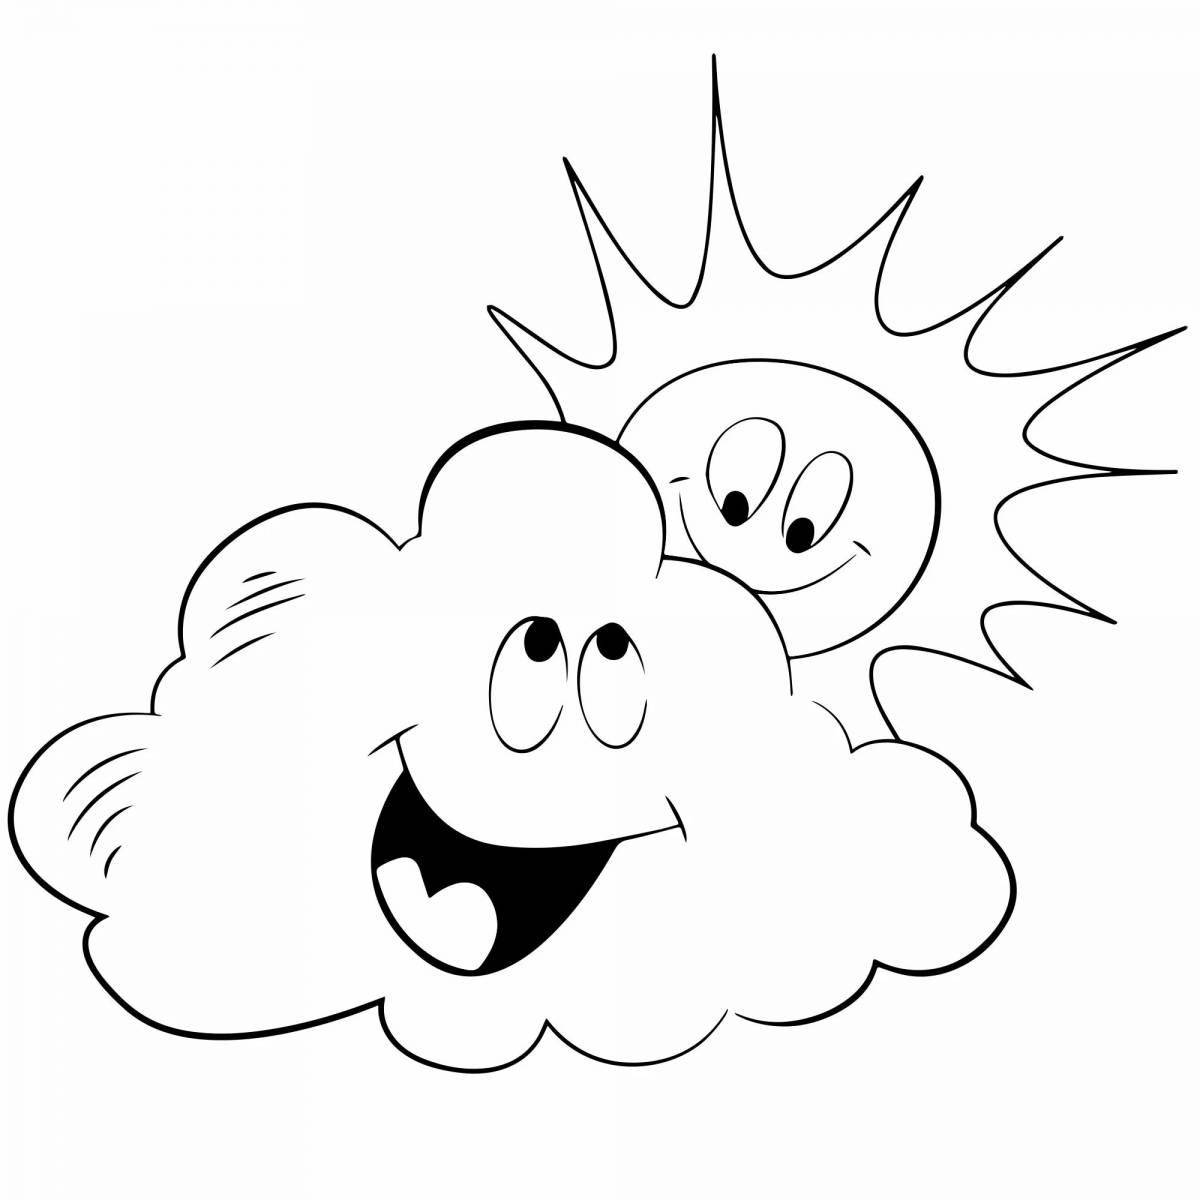 Amazing cloud coloring book for kids